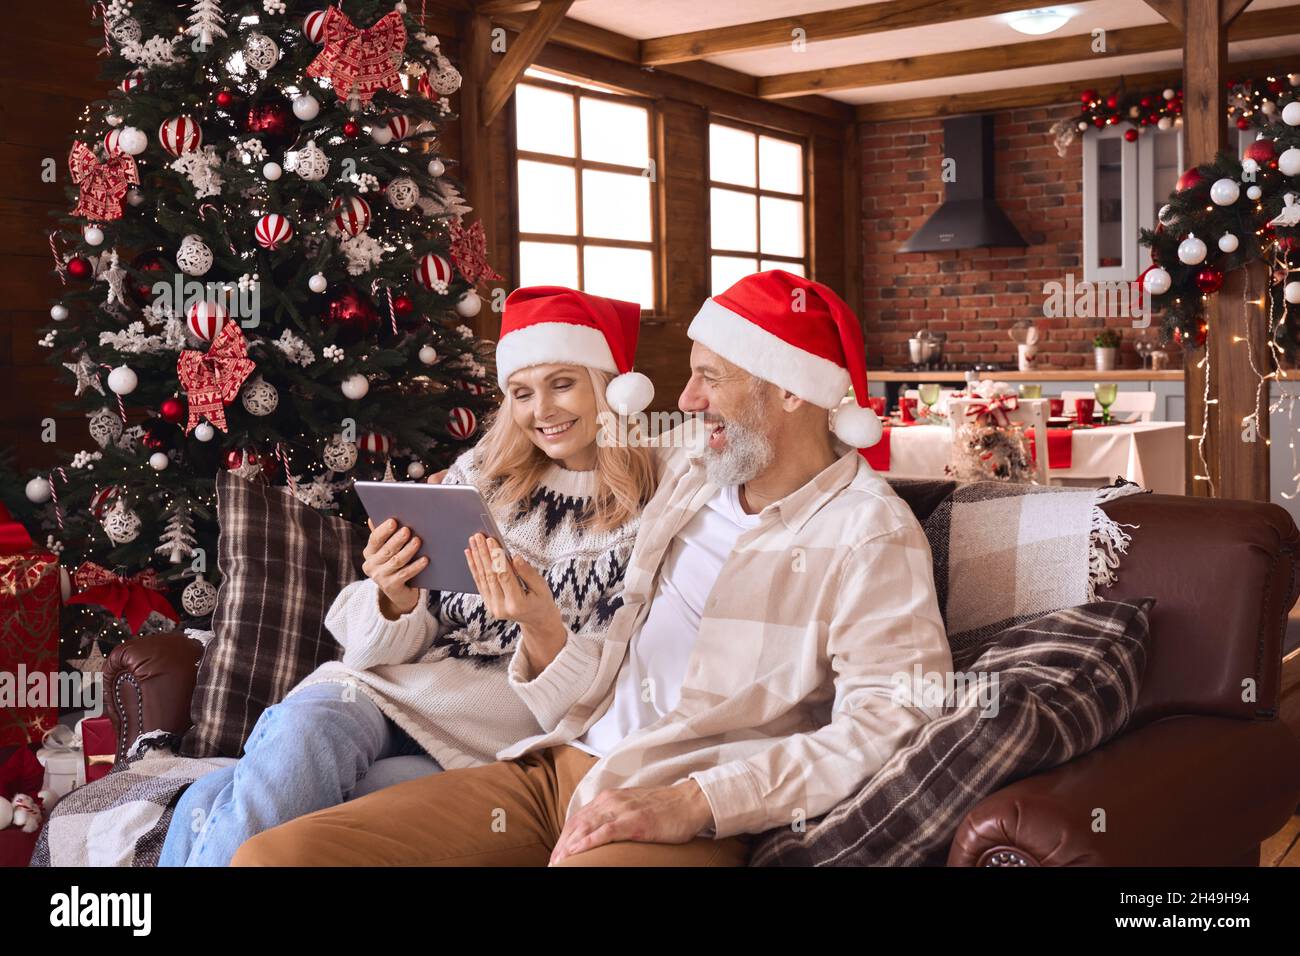 Happy 50s older couple using digital tablet in living room on Christmas. Stock Photo